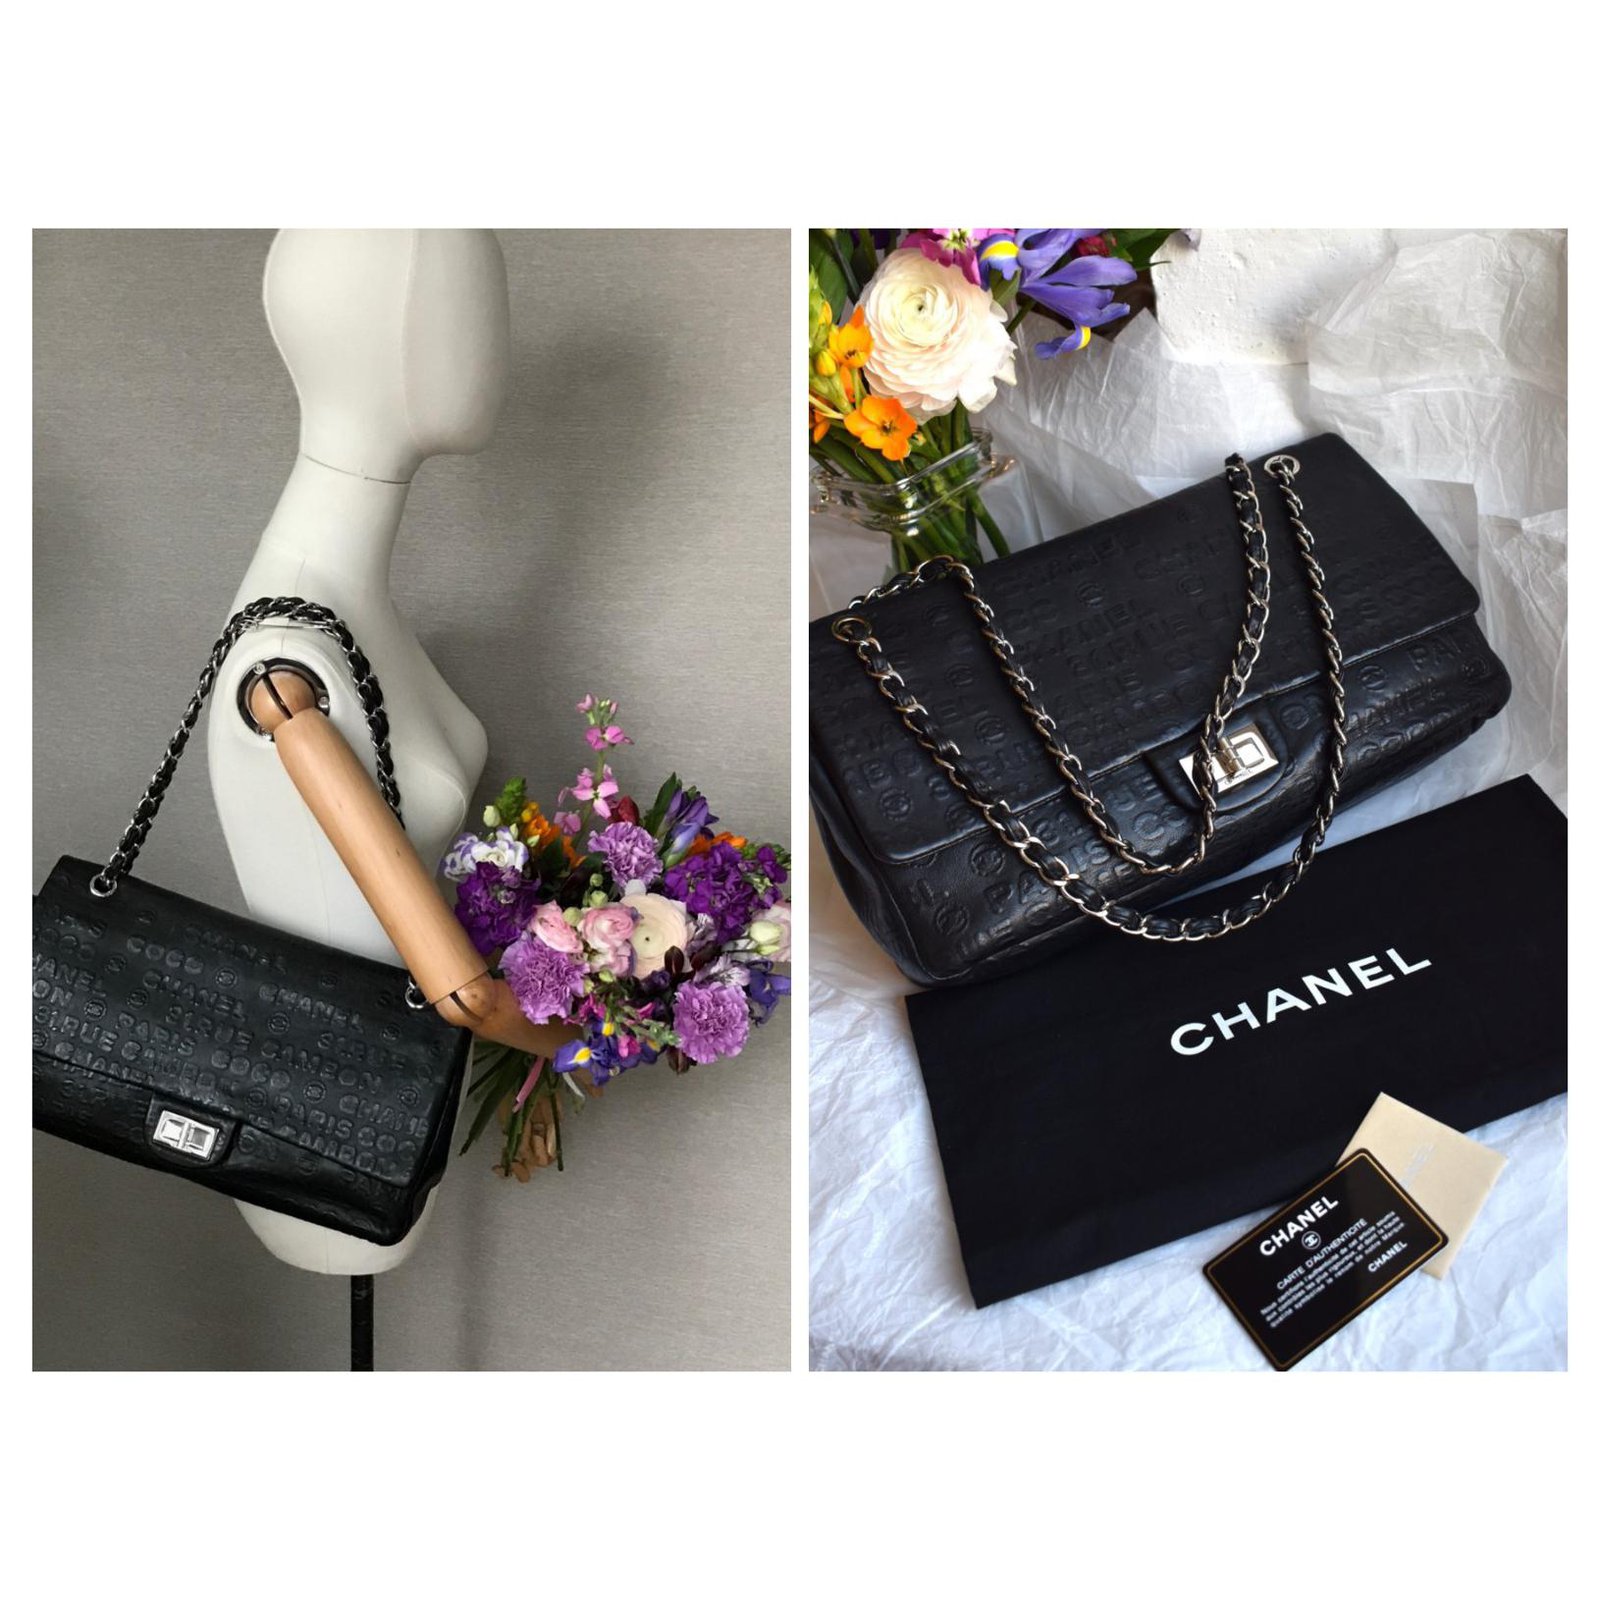 Chanel Reissue 2.55 Flap Bag Quilted Aged Calfskin 226 Gray